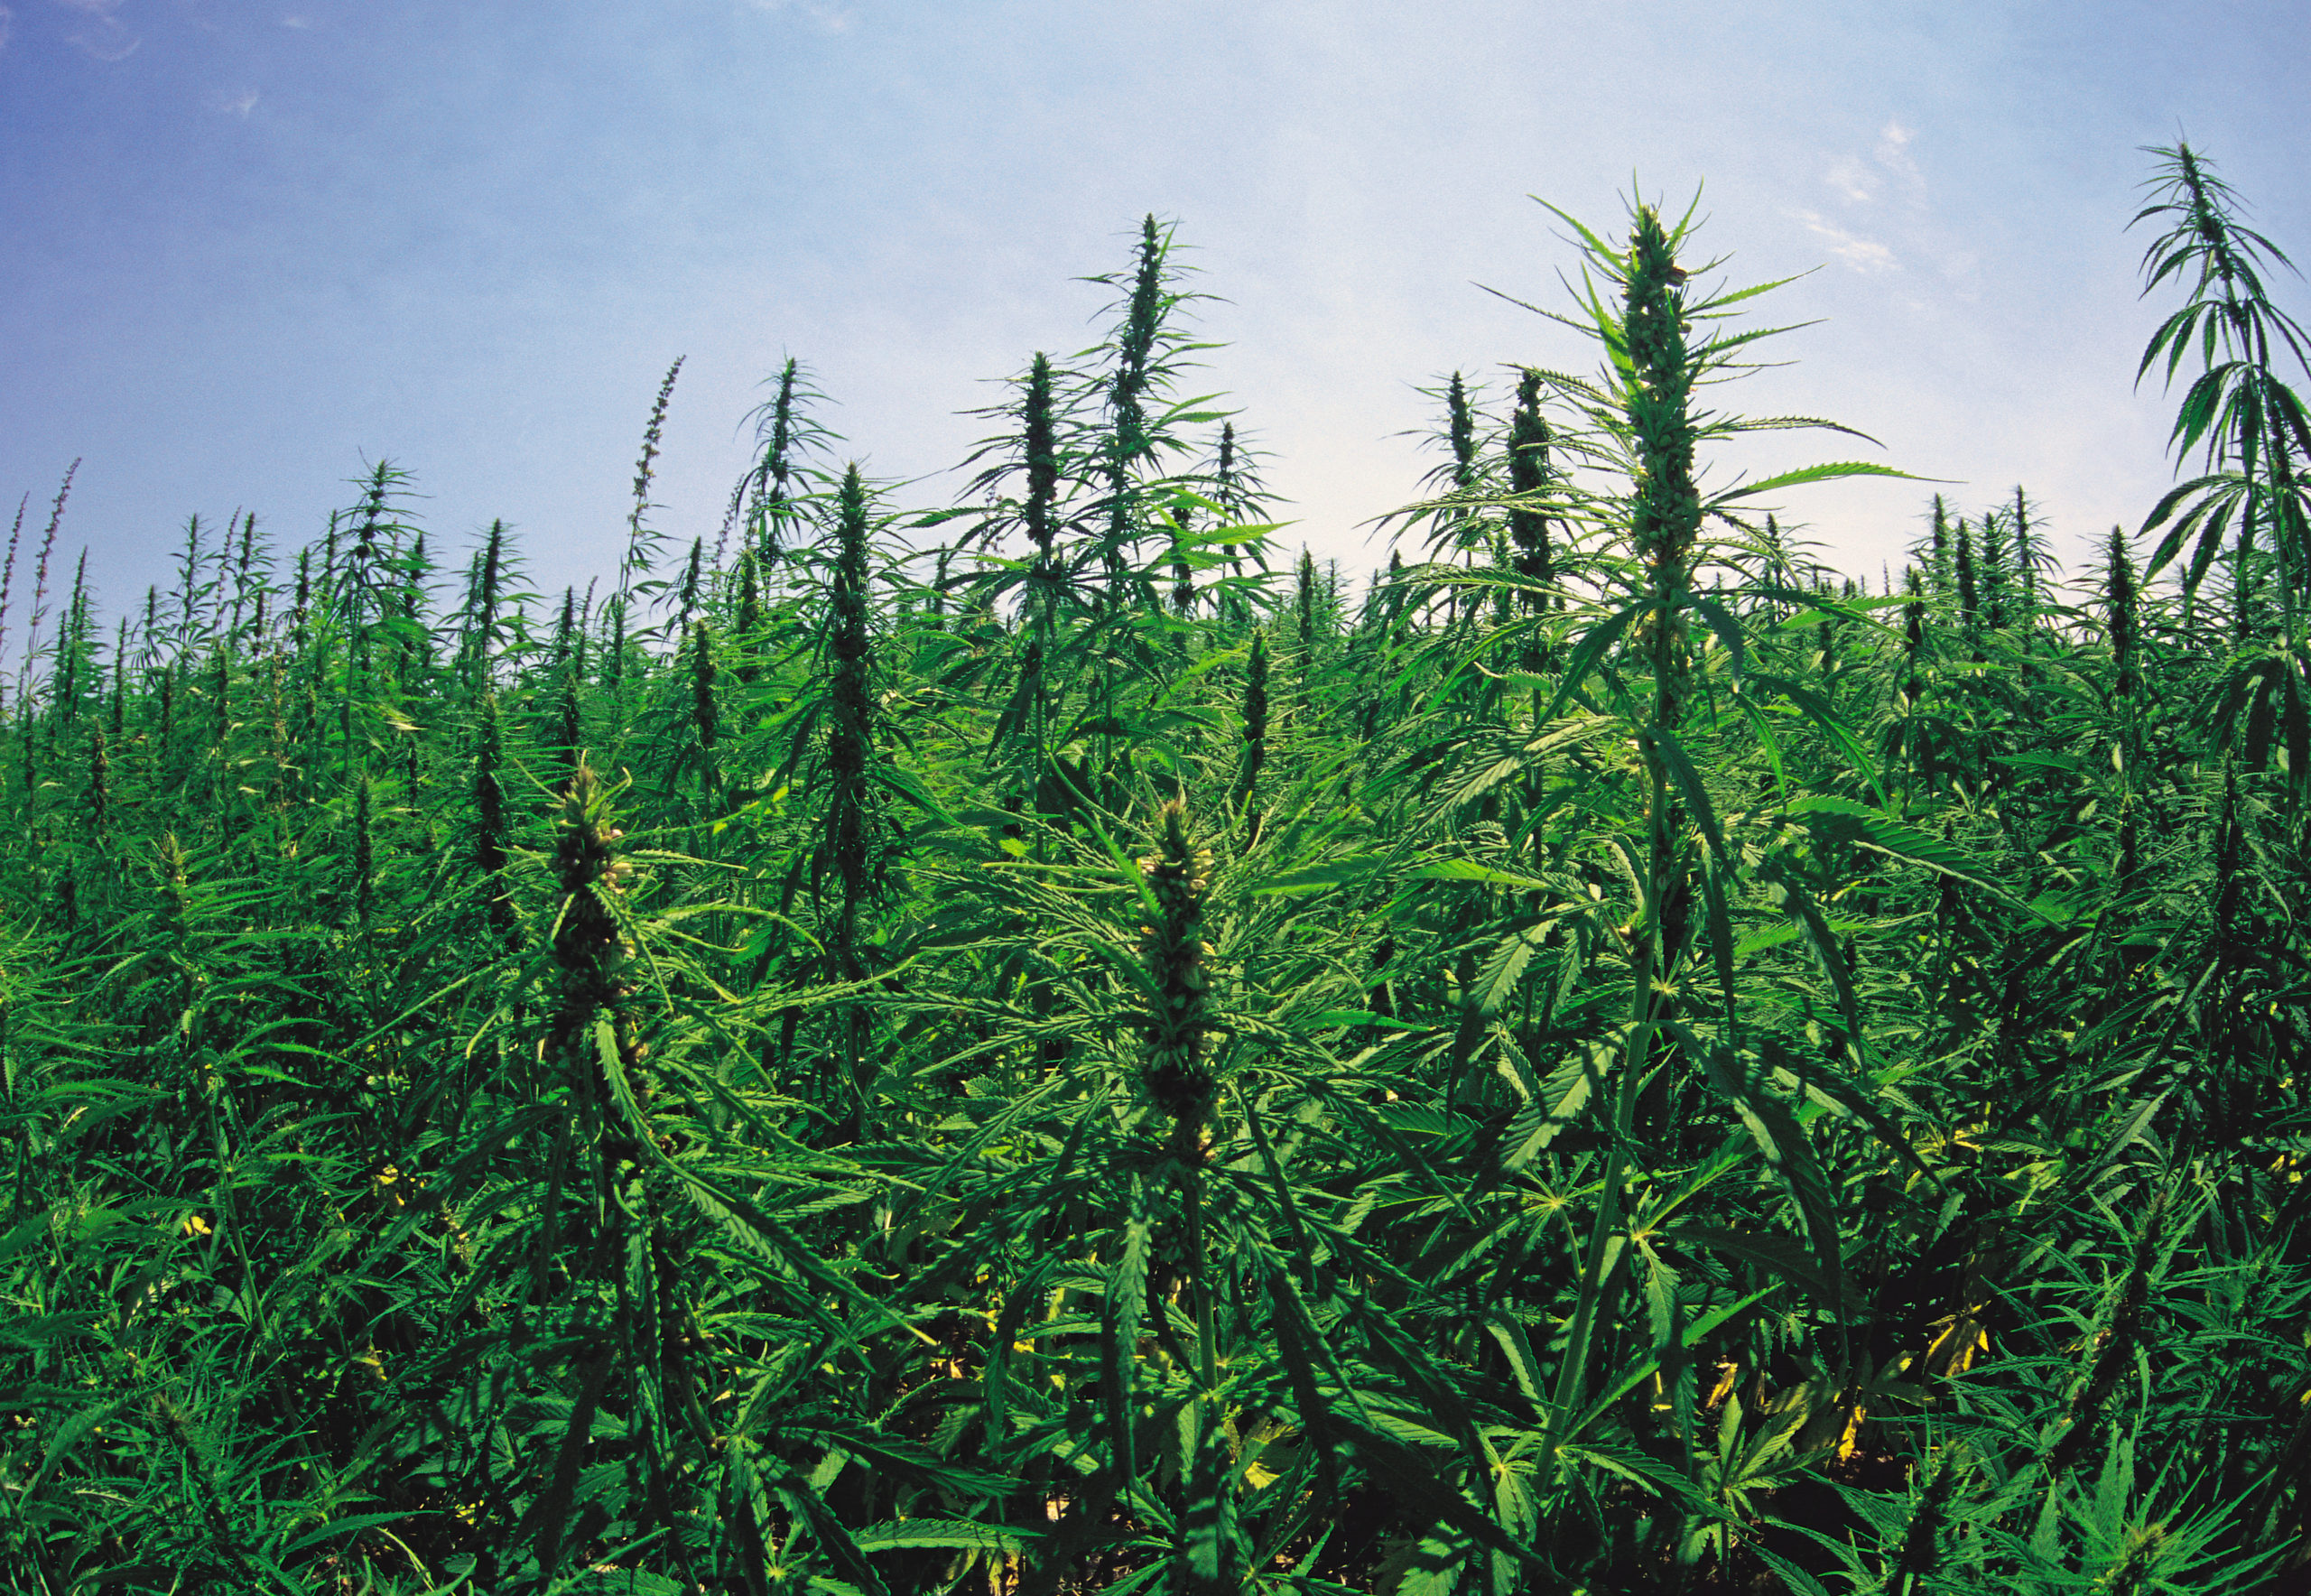 15 HEMP FACTS YOU DIDN'T KNOW